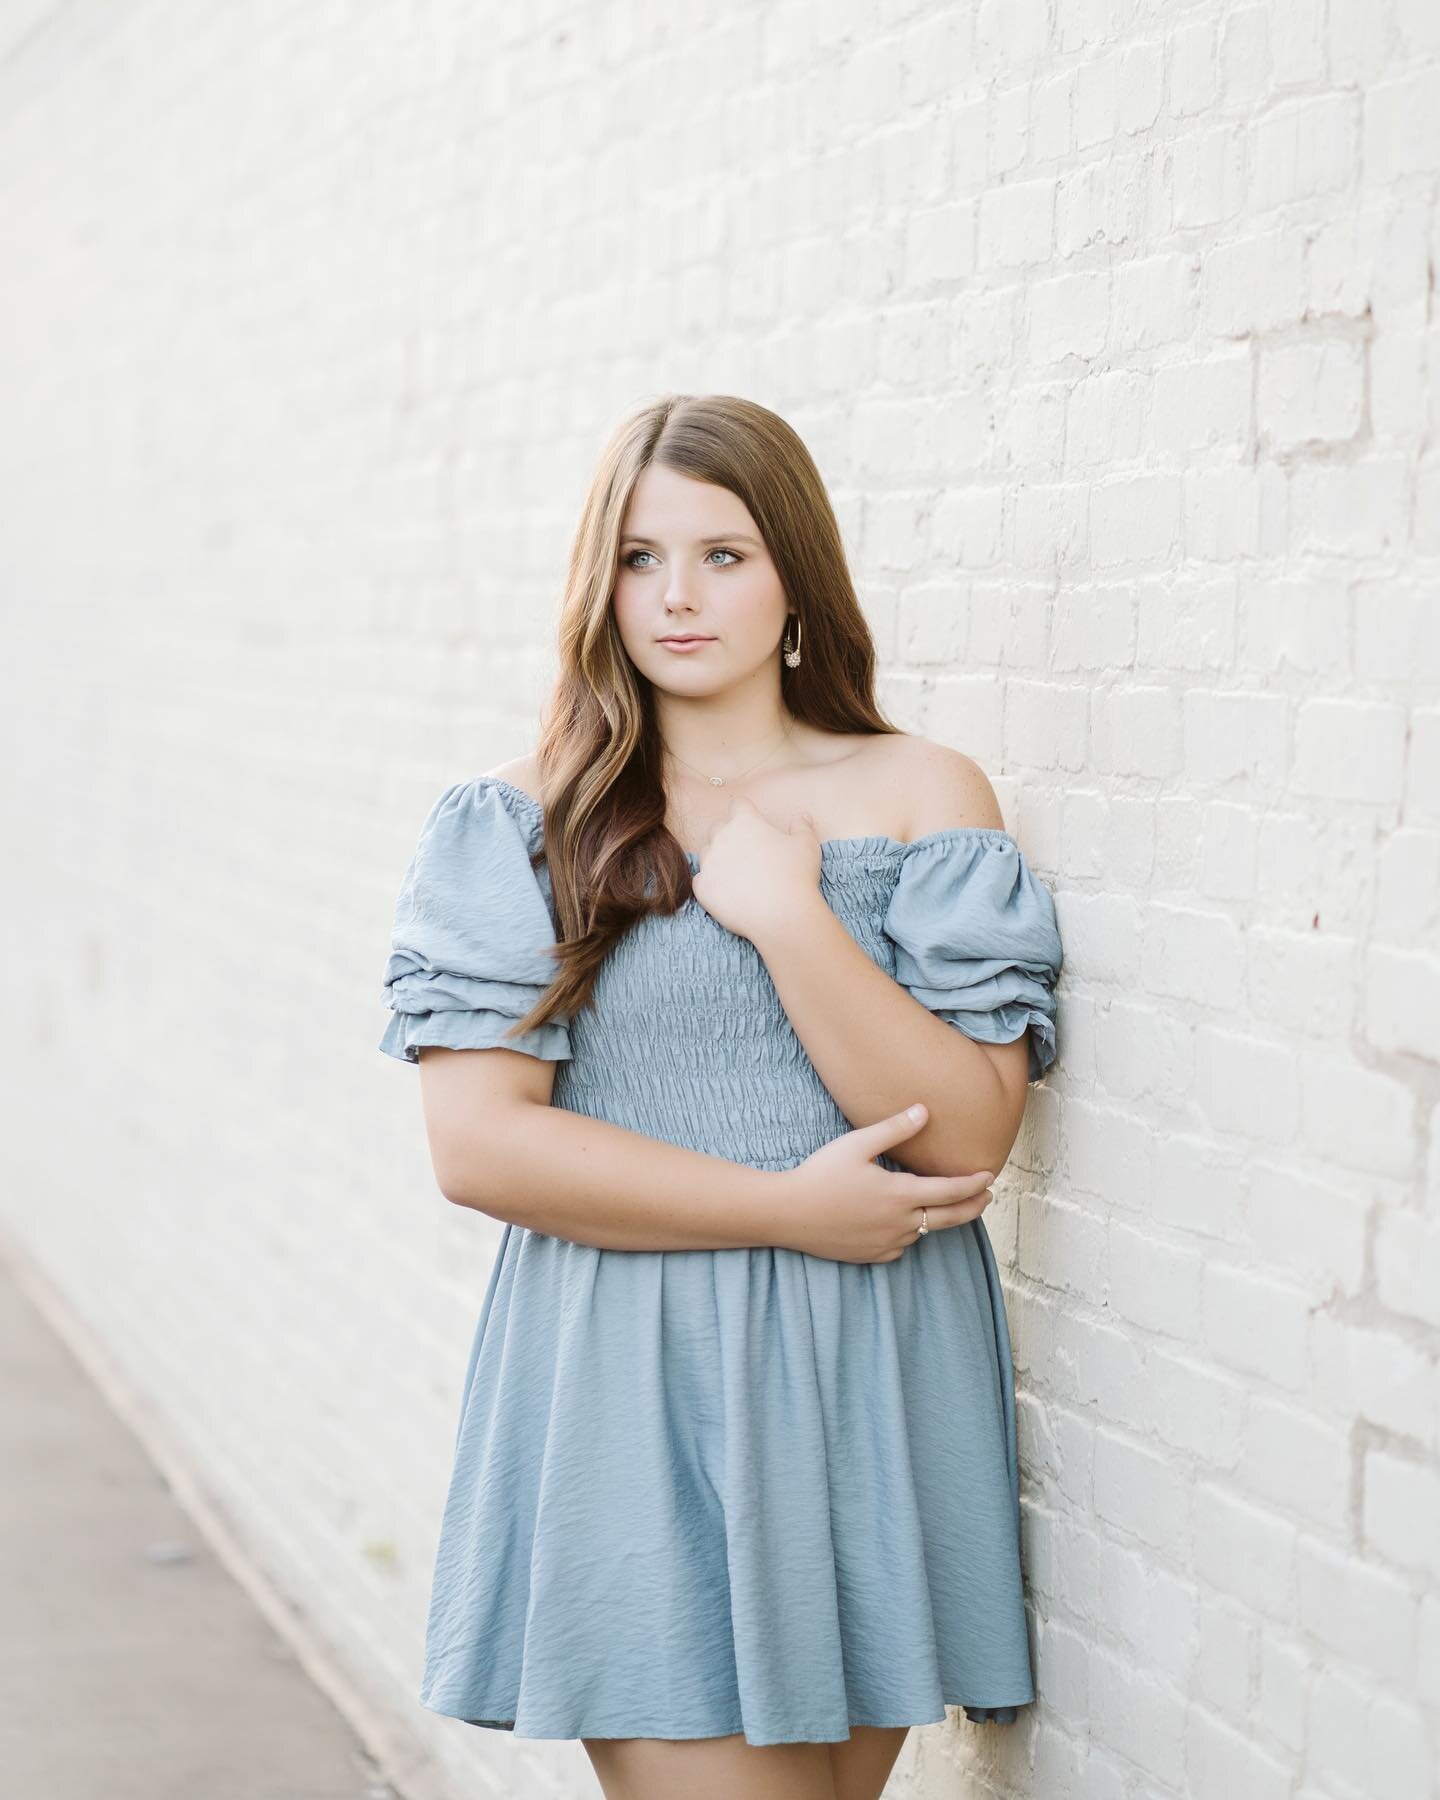 Another day, another gorgeous senior! I just love the way Leah&rsquo;s blue eyes and dress pop against that white wall! Whenever I&rsquo;m editing a session there&rsquo;s always one image (usually more) that I&rsquo;m like&hellip;&rdquo;Oh, that&rsquo;s wall art. I&rsquo;d frame that one.&rdquo; This one would be my framer. 🤍 #tuscaloosa #tuscaloosaphotographer #tuscaloosaphotography #alabamaphotographer